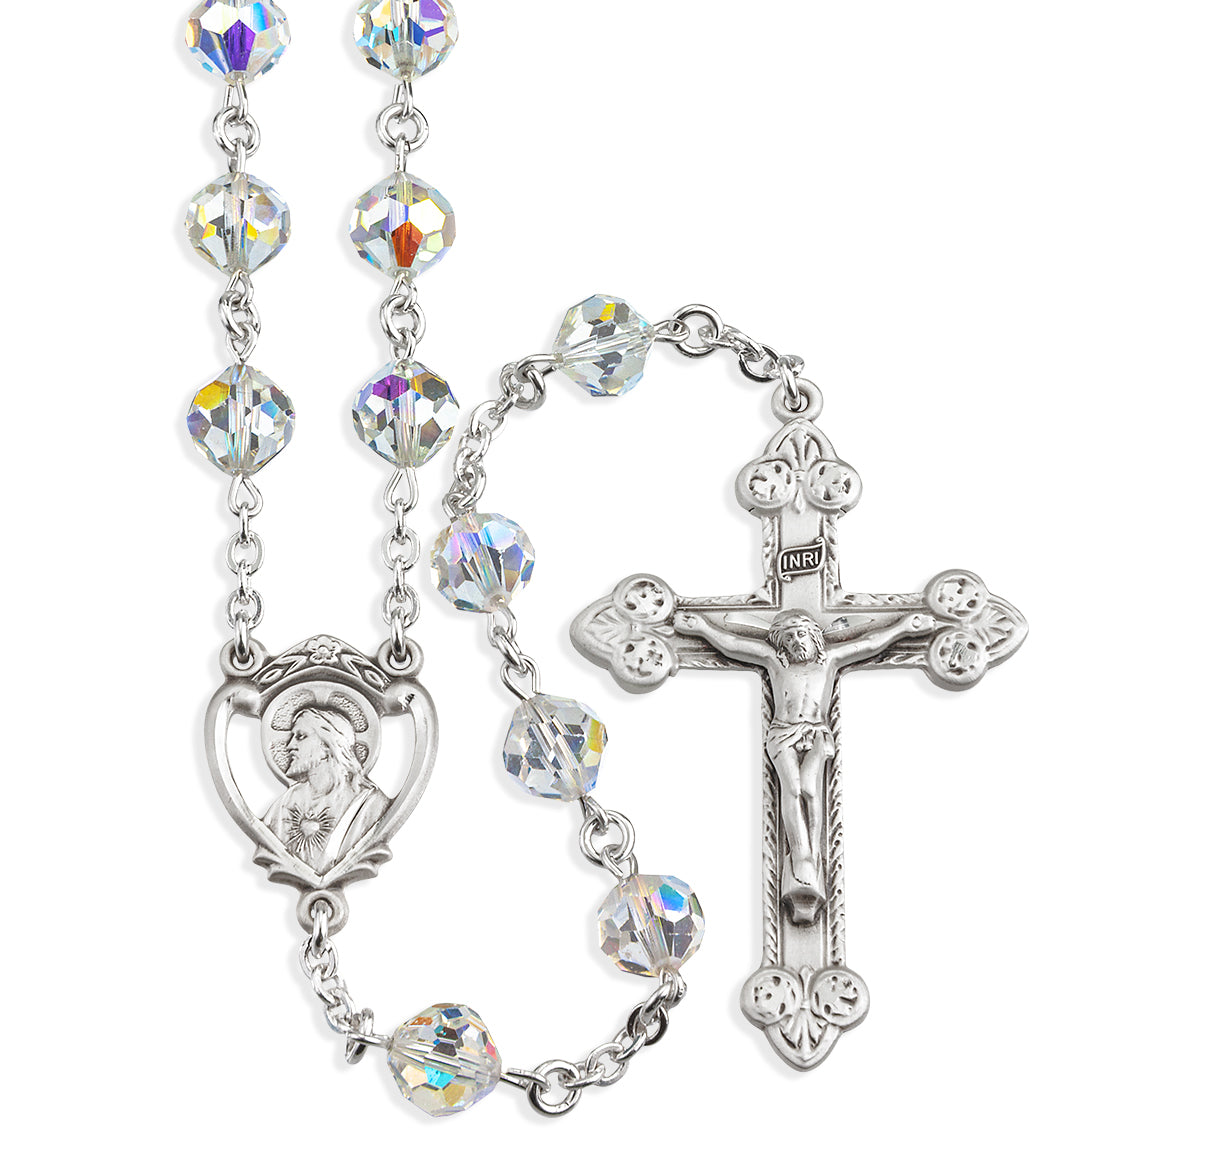 Sterling Silver Rosary Hand Made with Swarovski Crystal 8mm Aurora Borealis Sphere Shape Beads by HMH